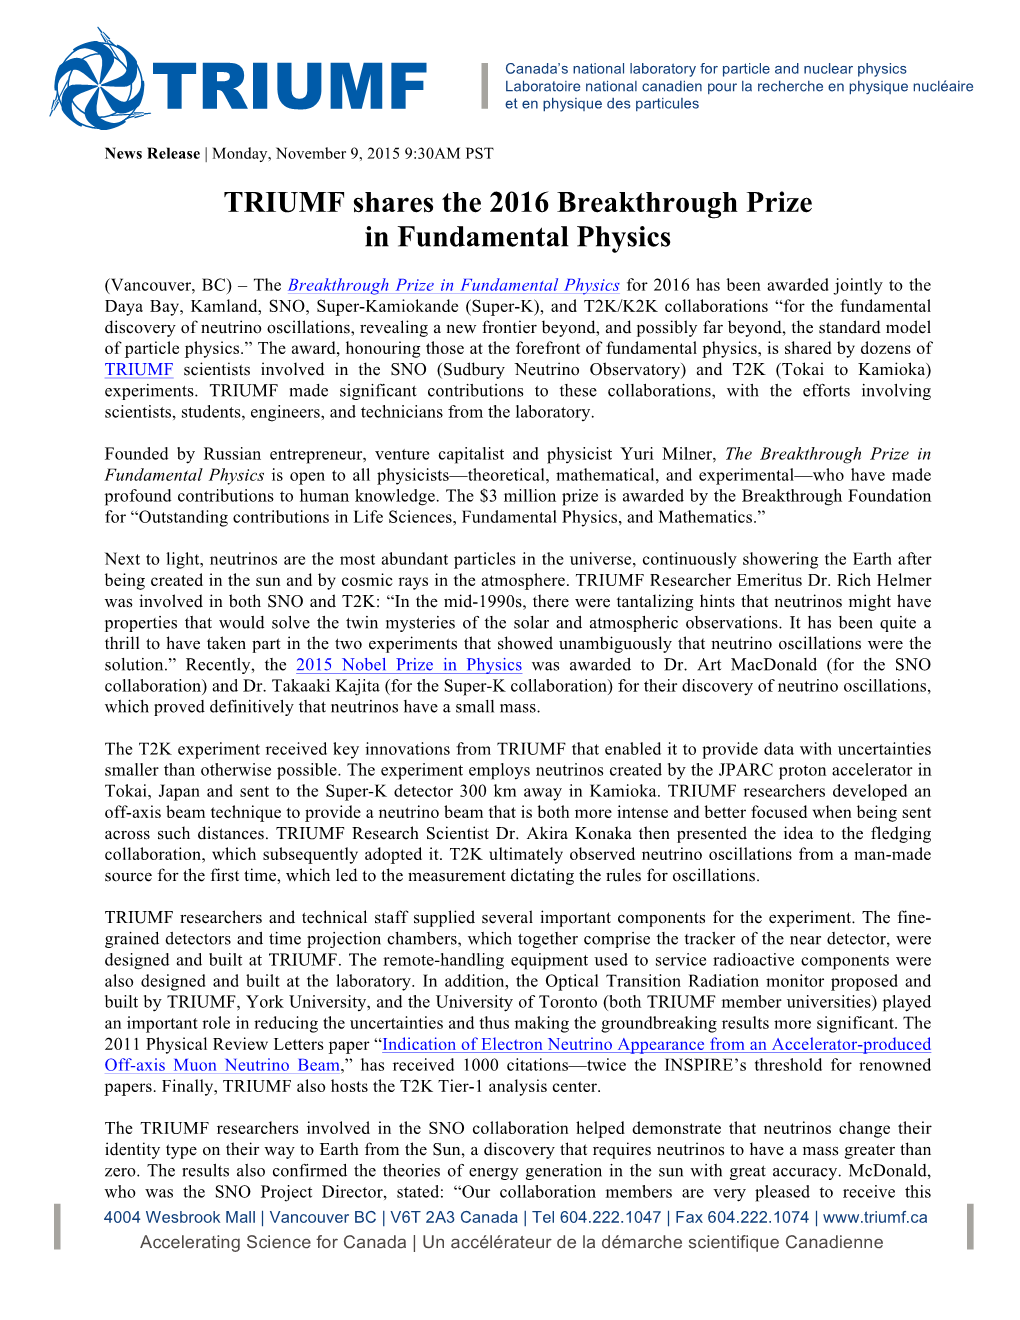 TRIUMF Shares the 2016 Breakthrough Prize in Fundamental Physics